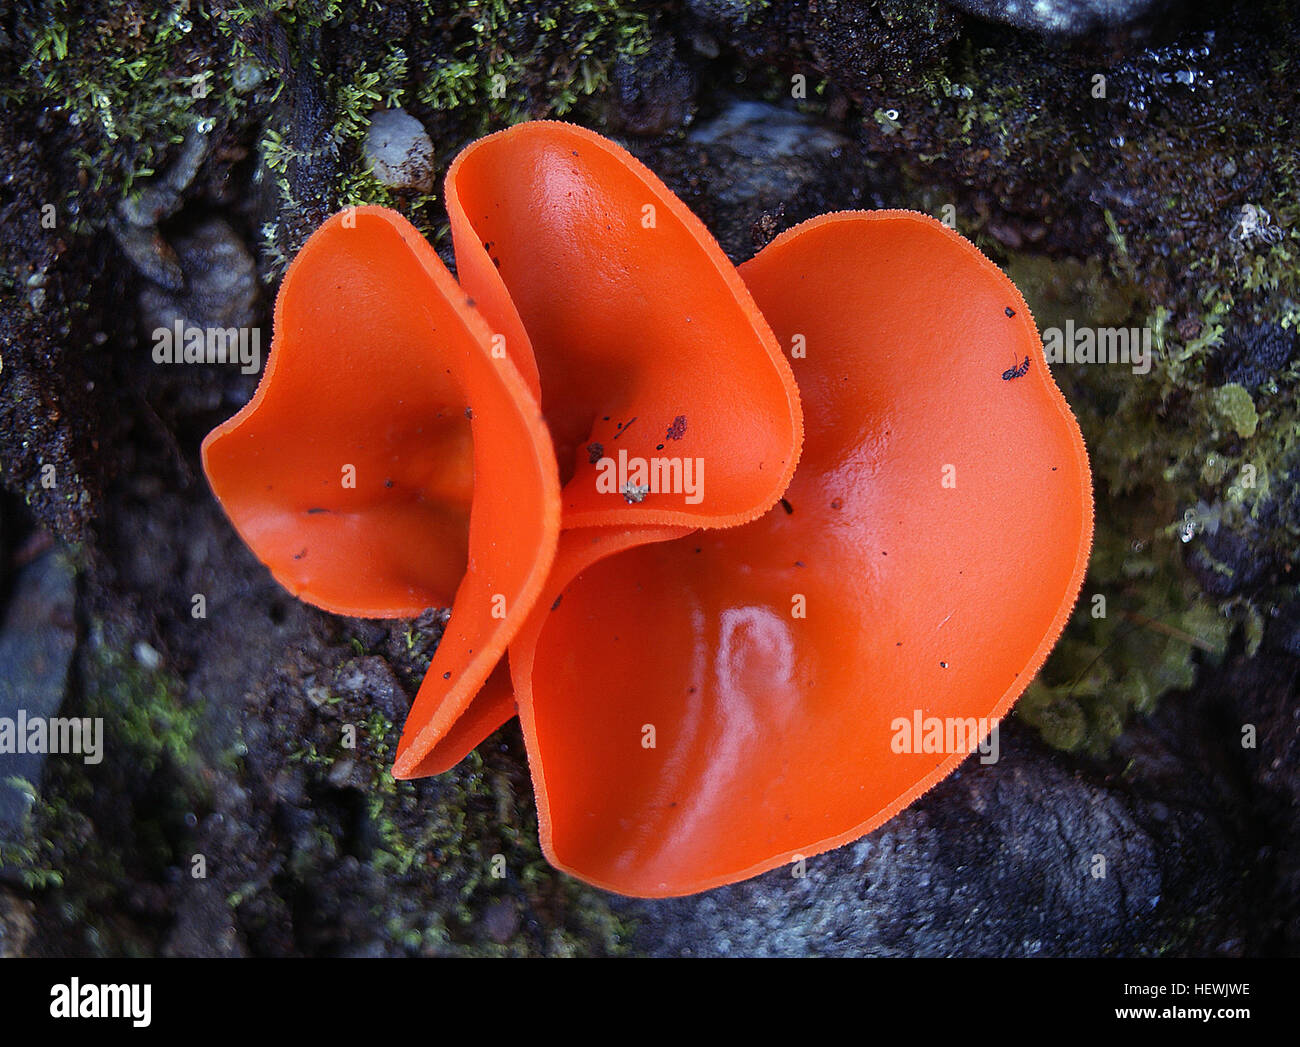 Orange peel fungus (Aleuria aurantia), or orange fairy cup fungus is a striking fungi that can be found growing throughout North America, especially during the summer and fall. This fungus, like other members of the cup fungi family, has a cup-like body with folds and is a brilliant orange color, which some may mistake for a discarded orange peel. Spores are big and have spiny projections. Stock Photo